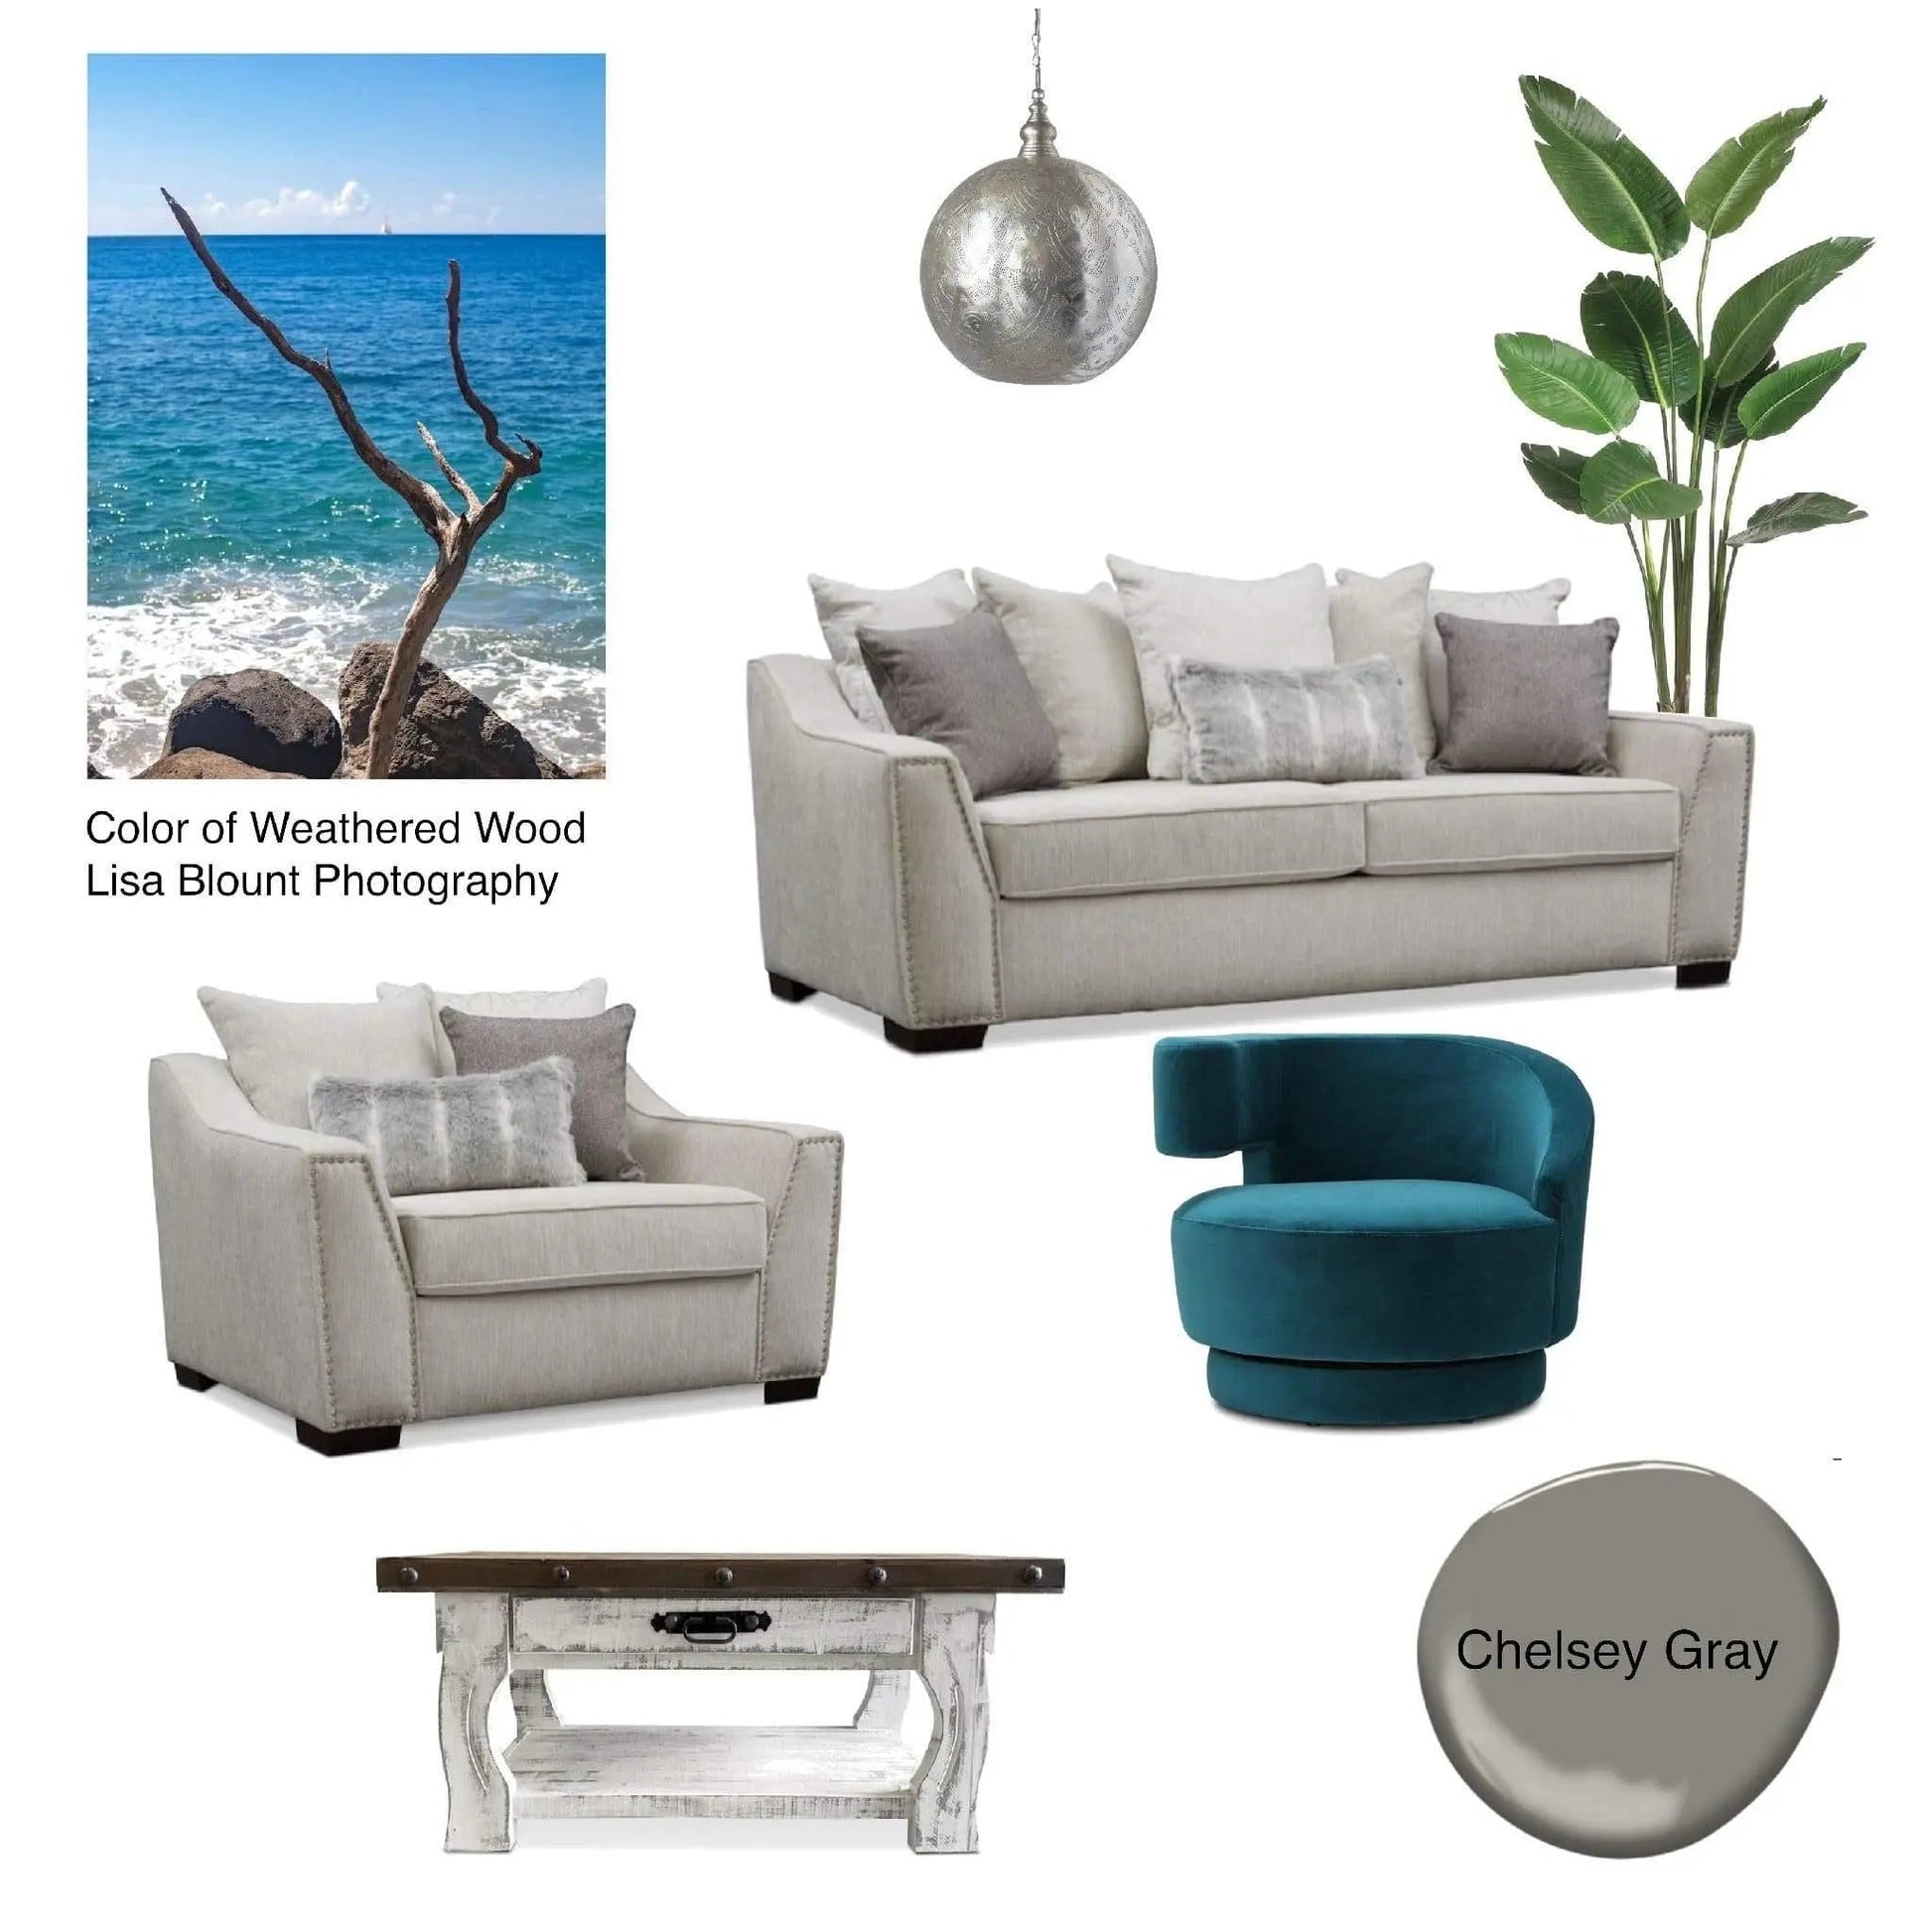 Gray and teal home decor mood board with art of a tree branch growing by the ocean in st Lucia beach